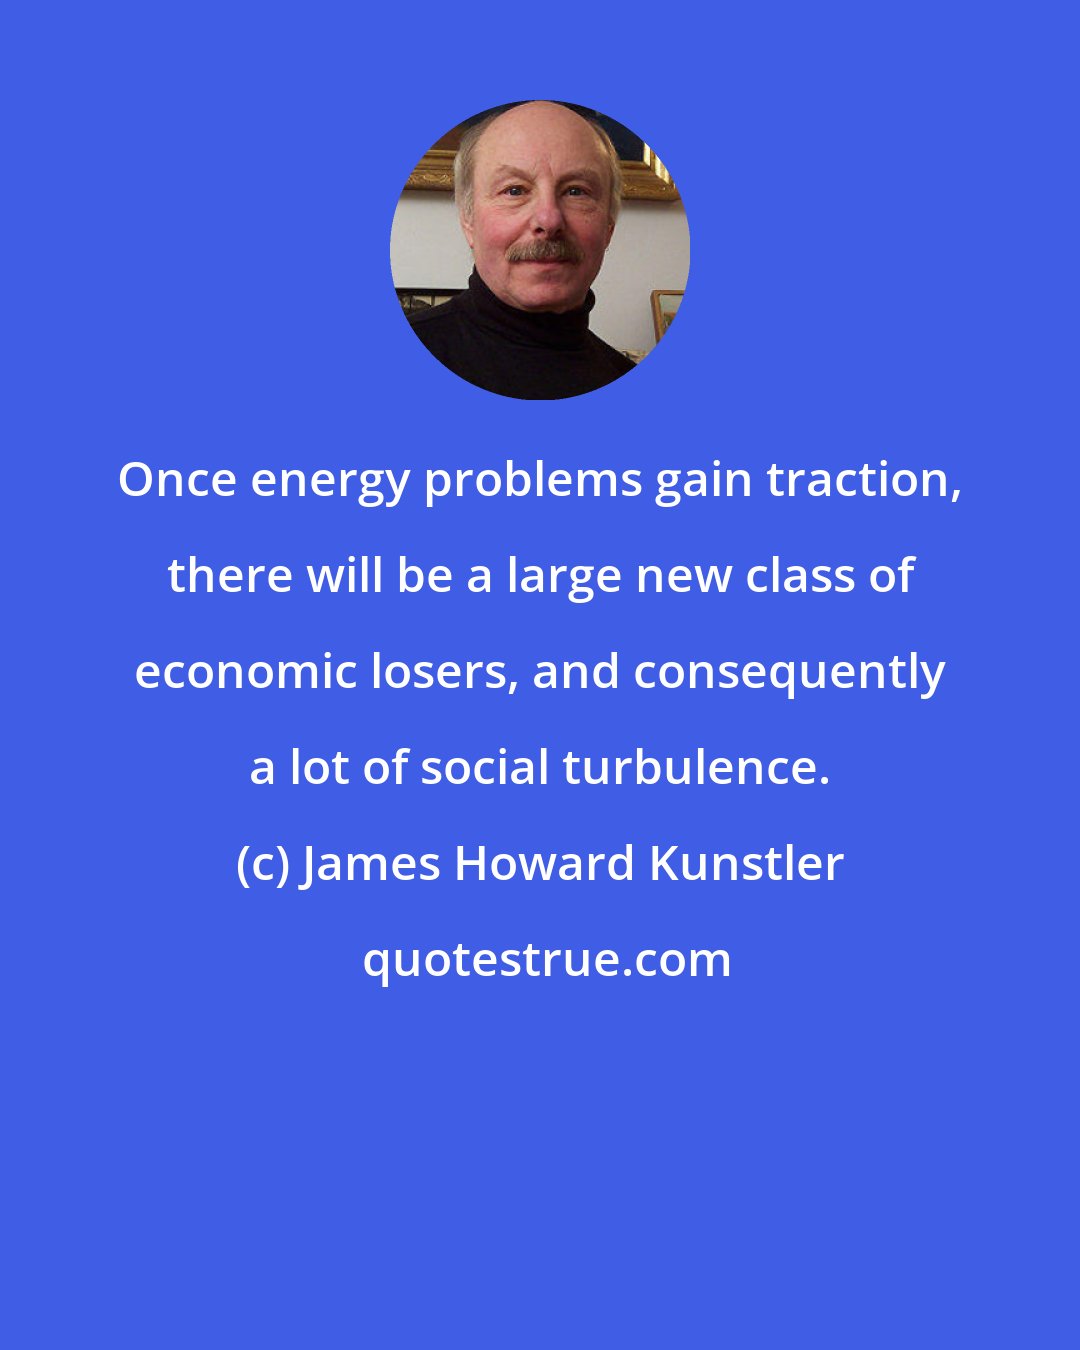 James Howard Kunstler: Once energy problems gain traction, there will be a large new class of economic losers, and consequently a lot of social turbulence.